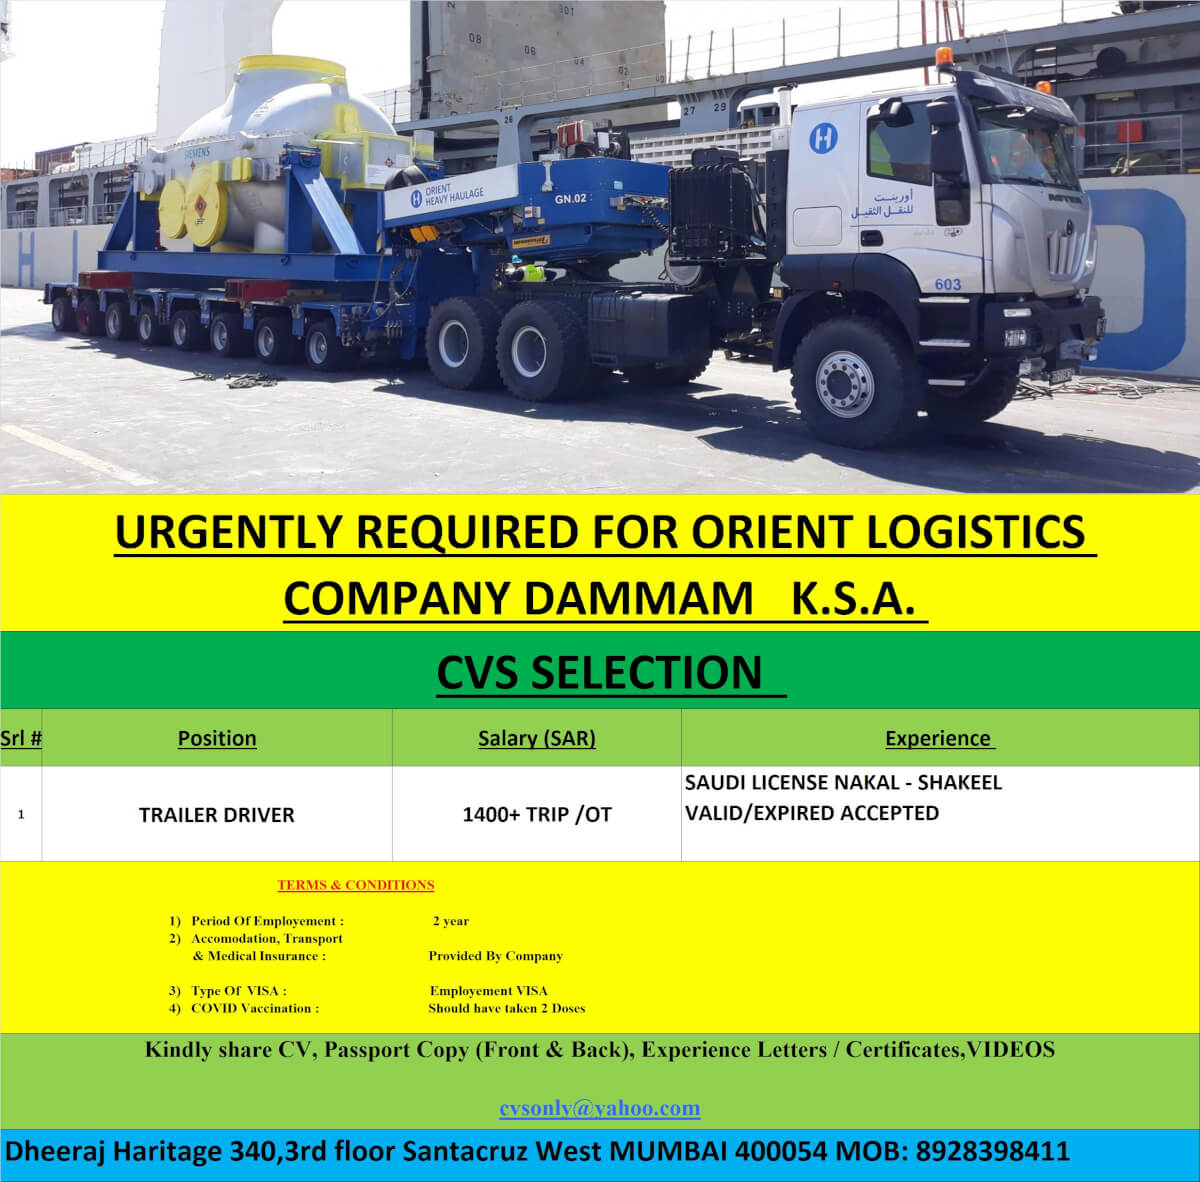 URGENTLY REQUIRED FOR ORIENT LOGISTIC COMPANY DAMMAM K.S.A.